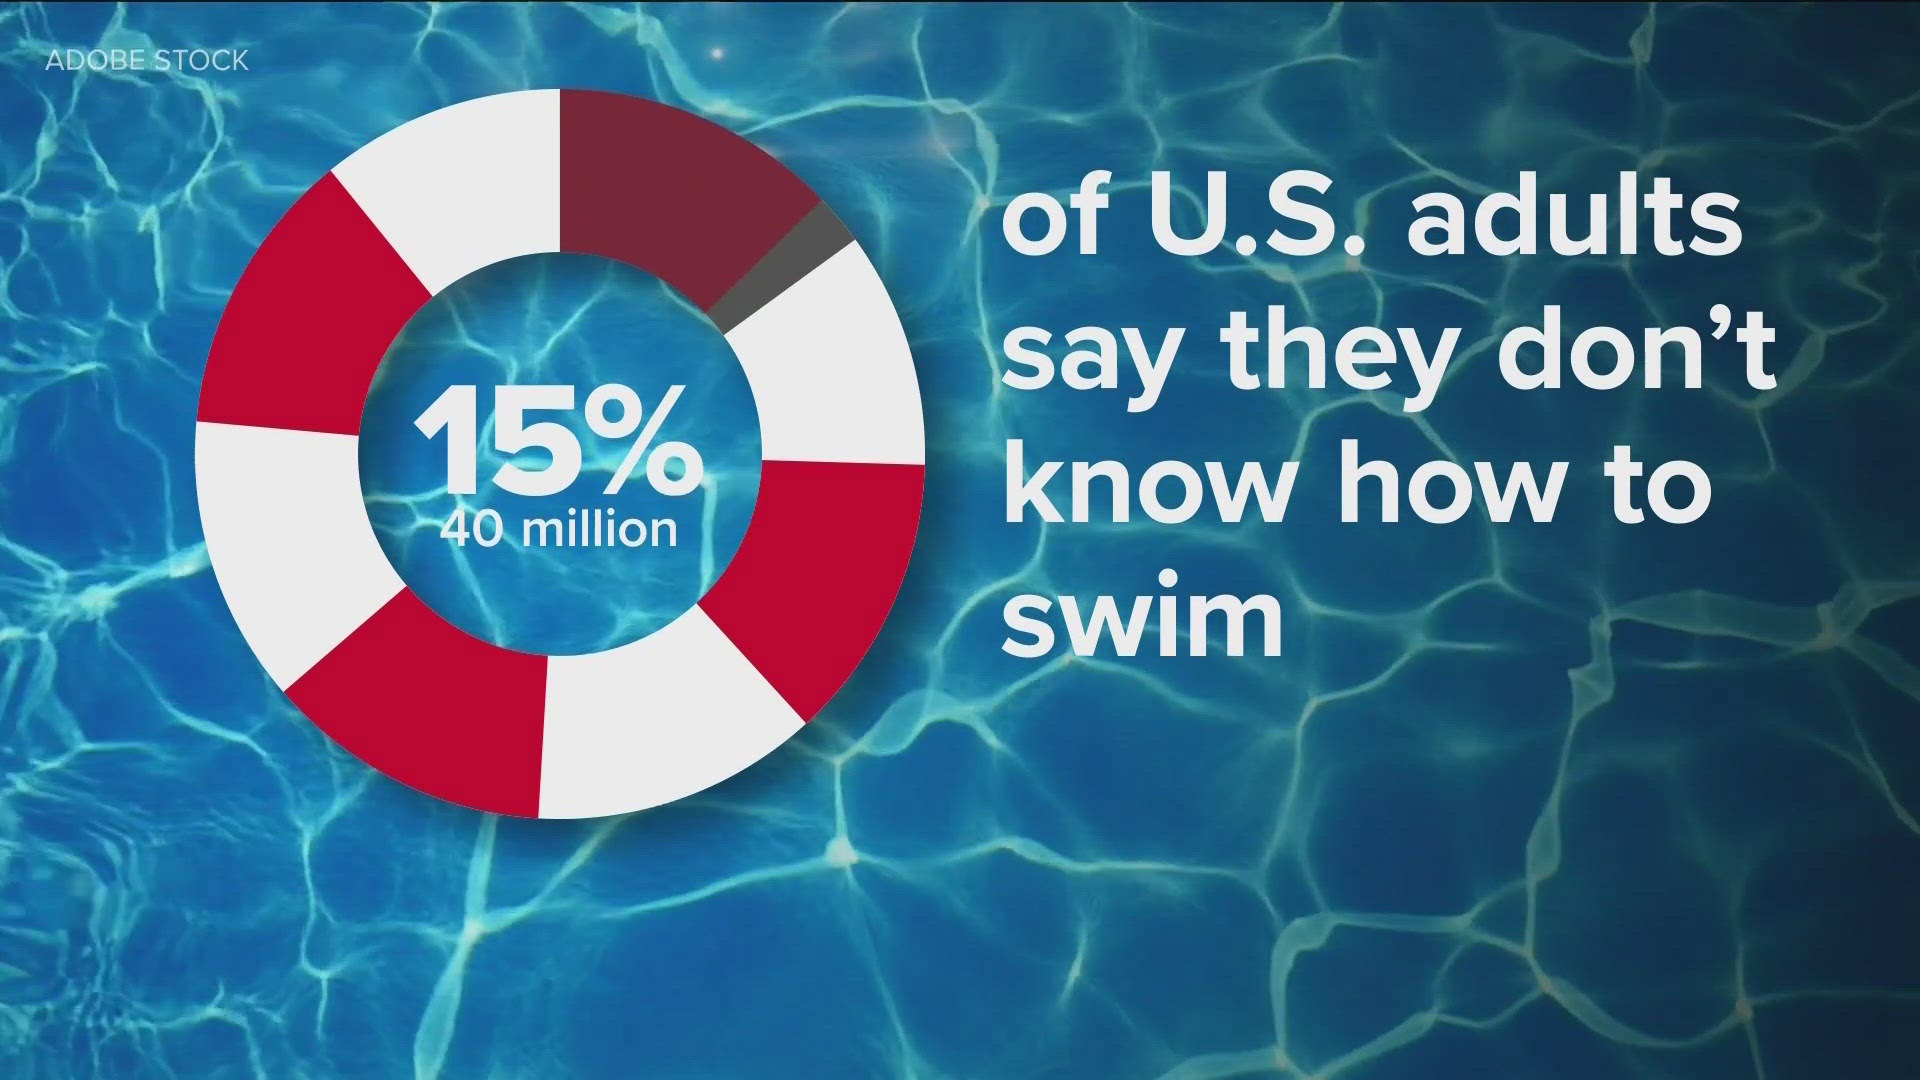 Drowning is the number one cause of unintentional injury-related death among kids one to four years old in the United States.